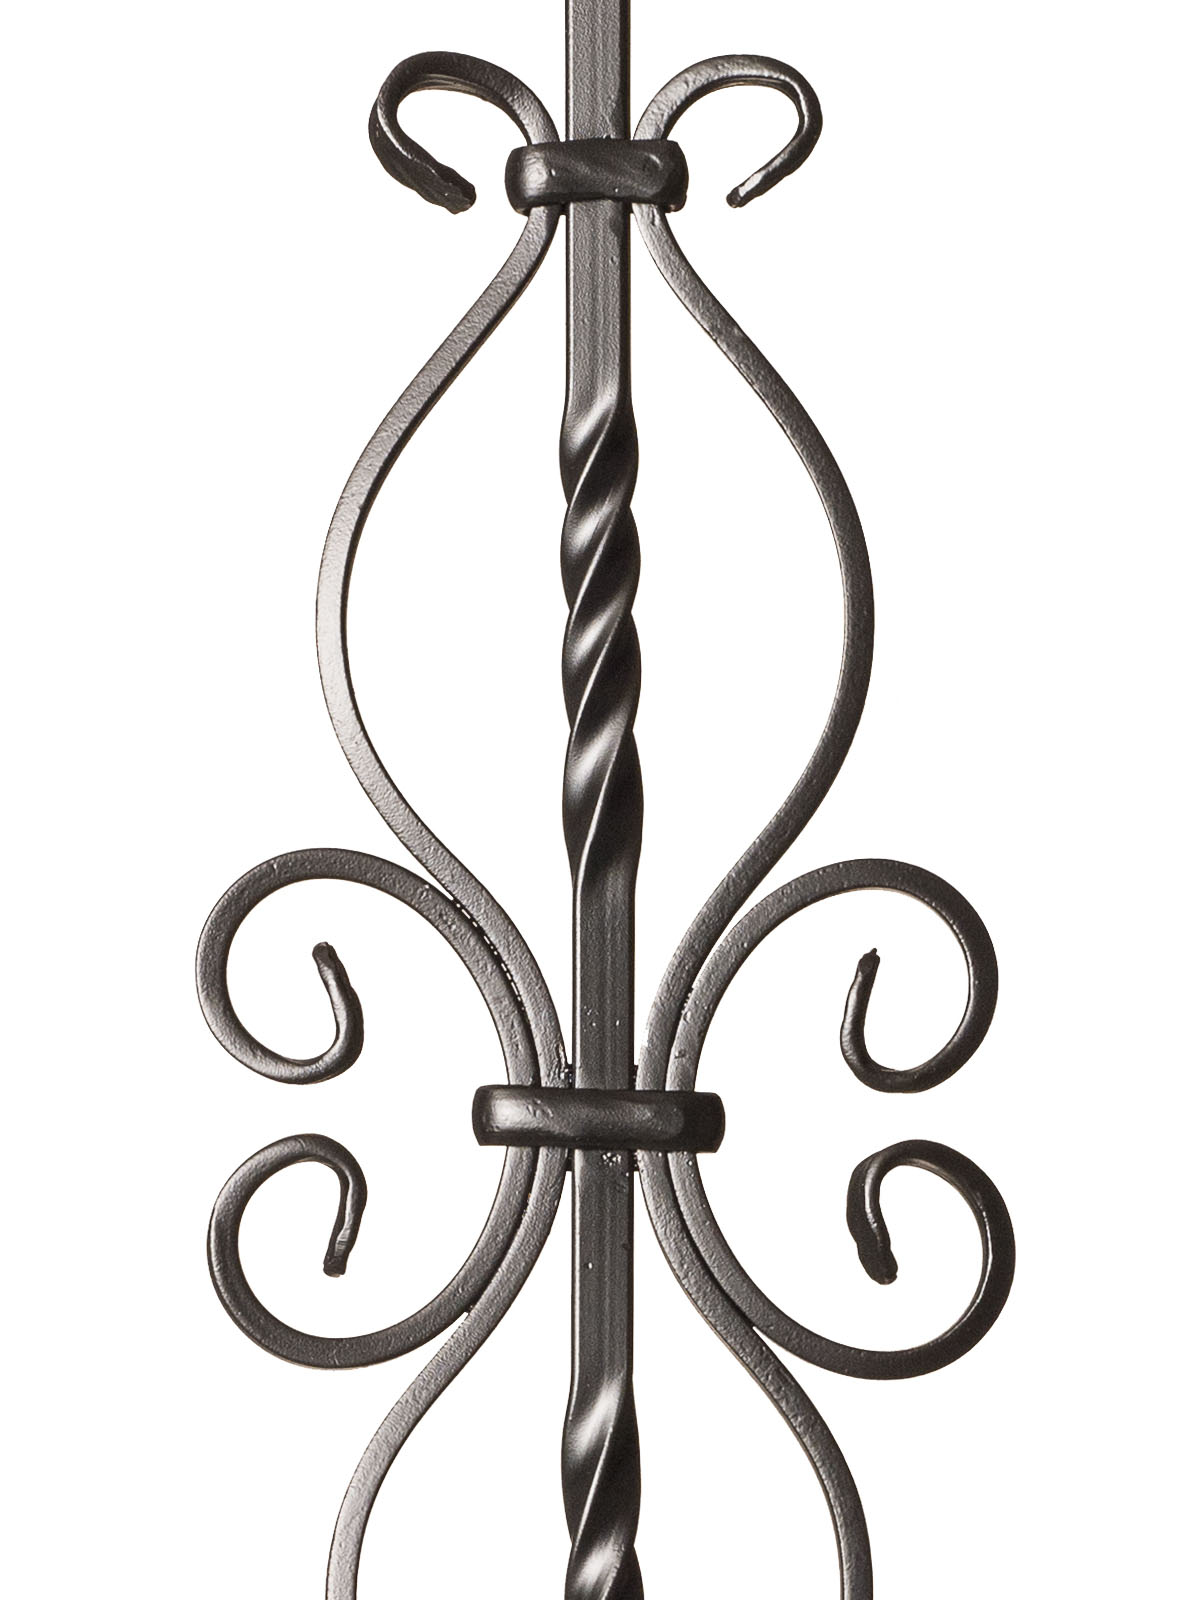 Iron Baluster 9057 - 1/2" Square - Double Twist w/ Dragonfly